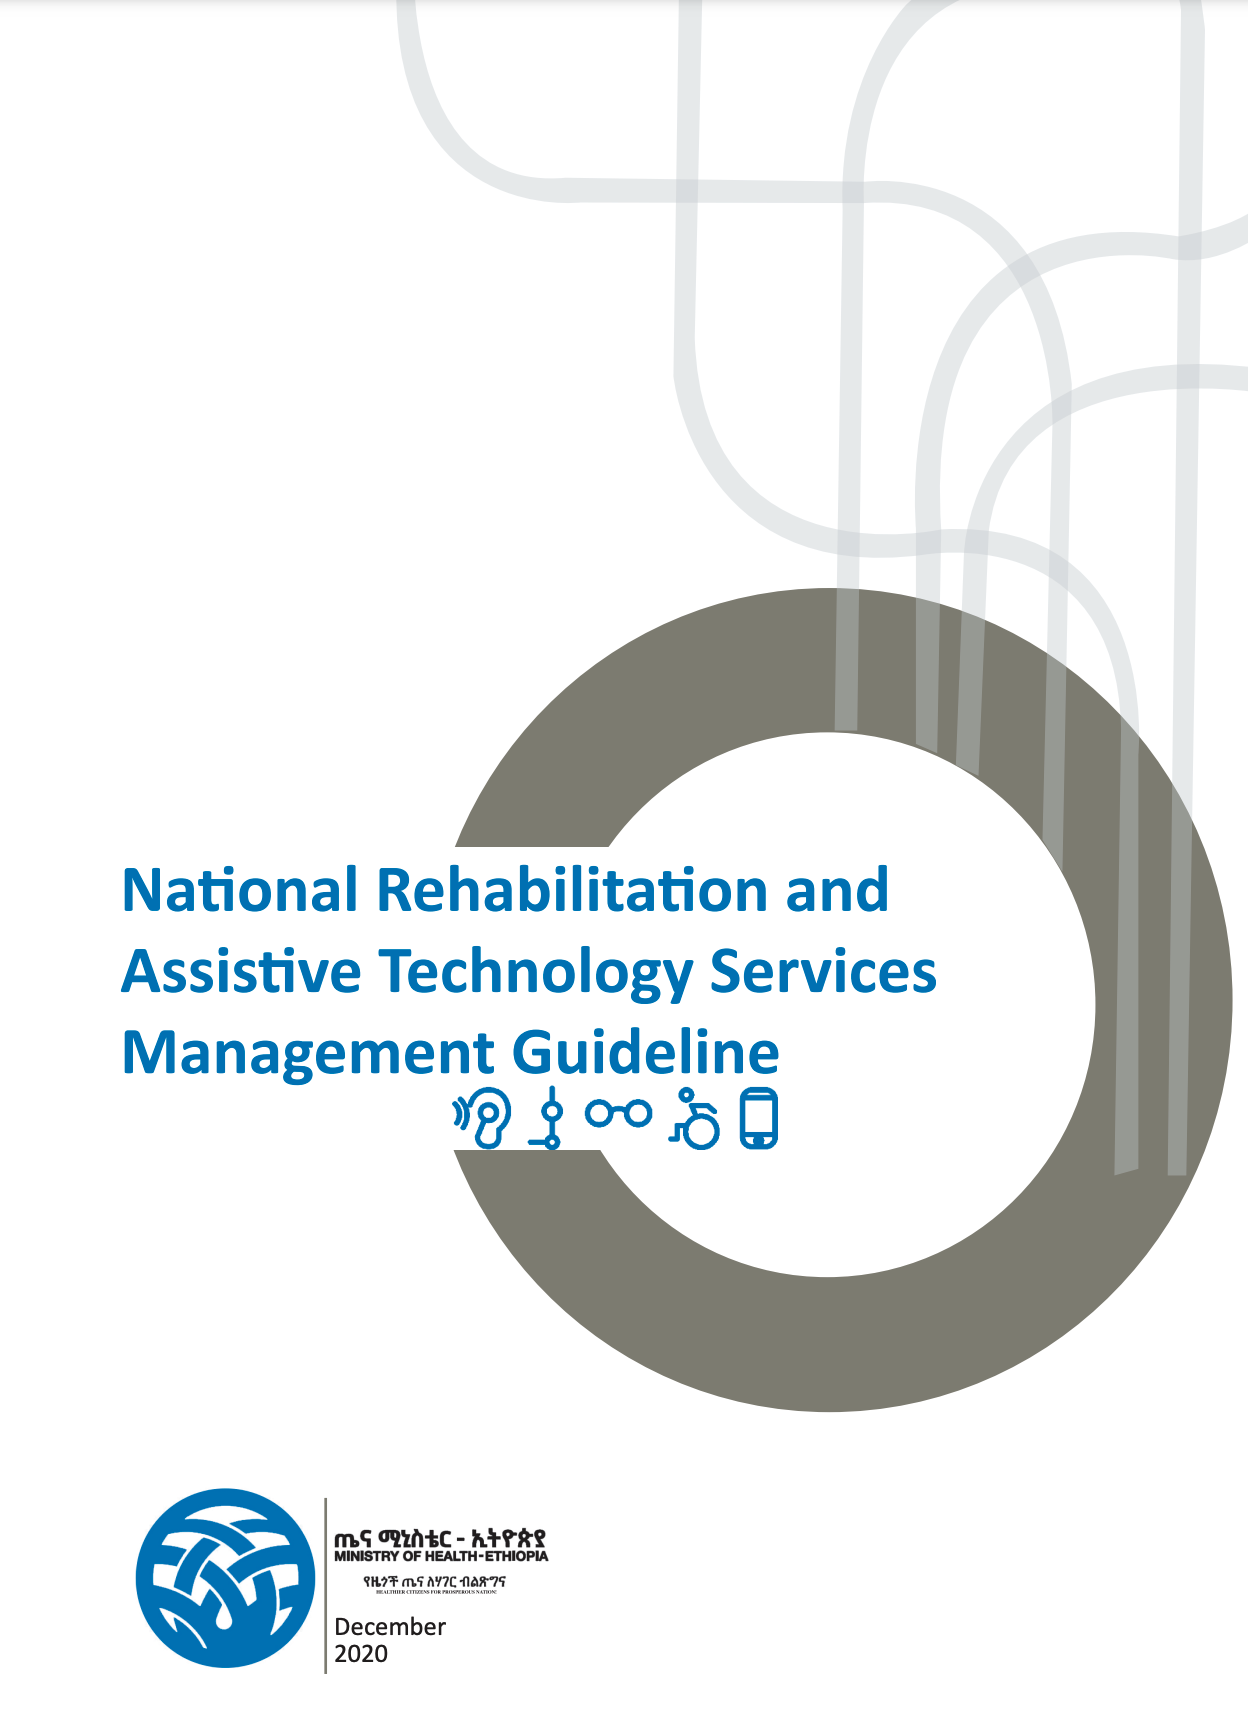 National Rehabilitation and Assistive Technology Services Management Guideline Cover Image